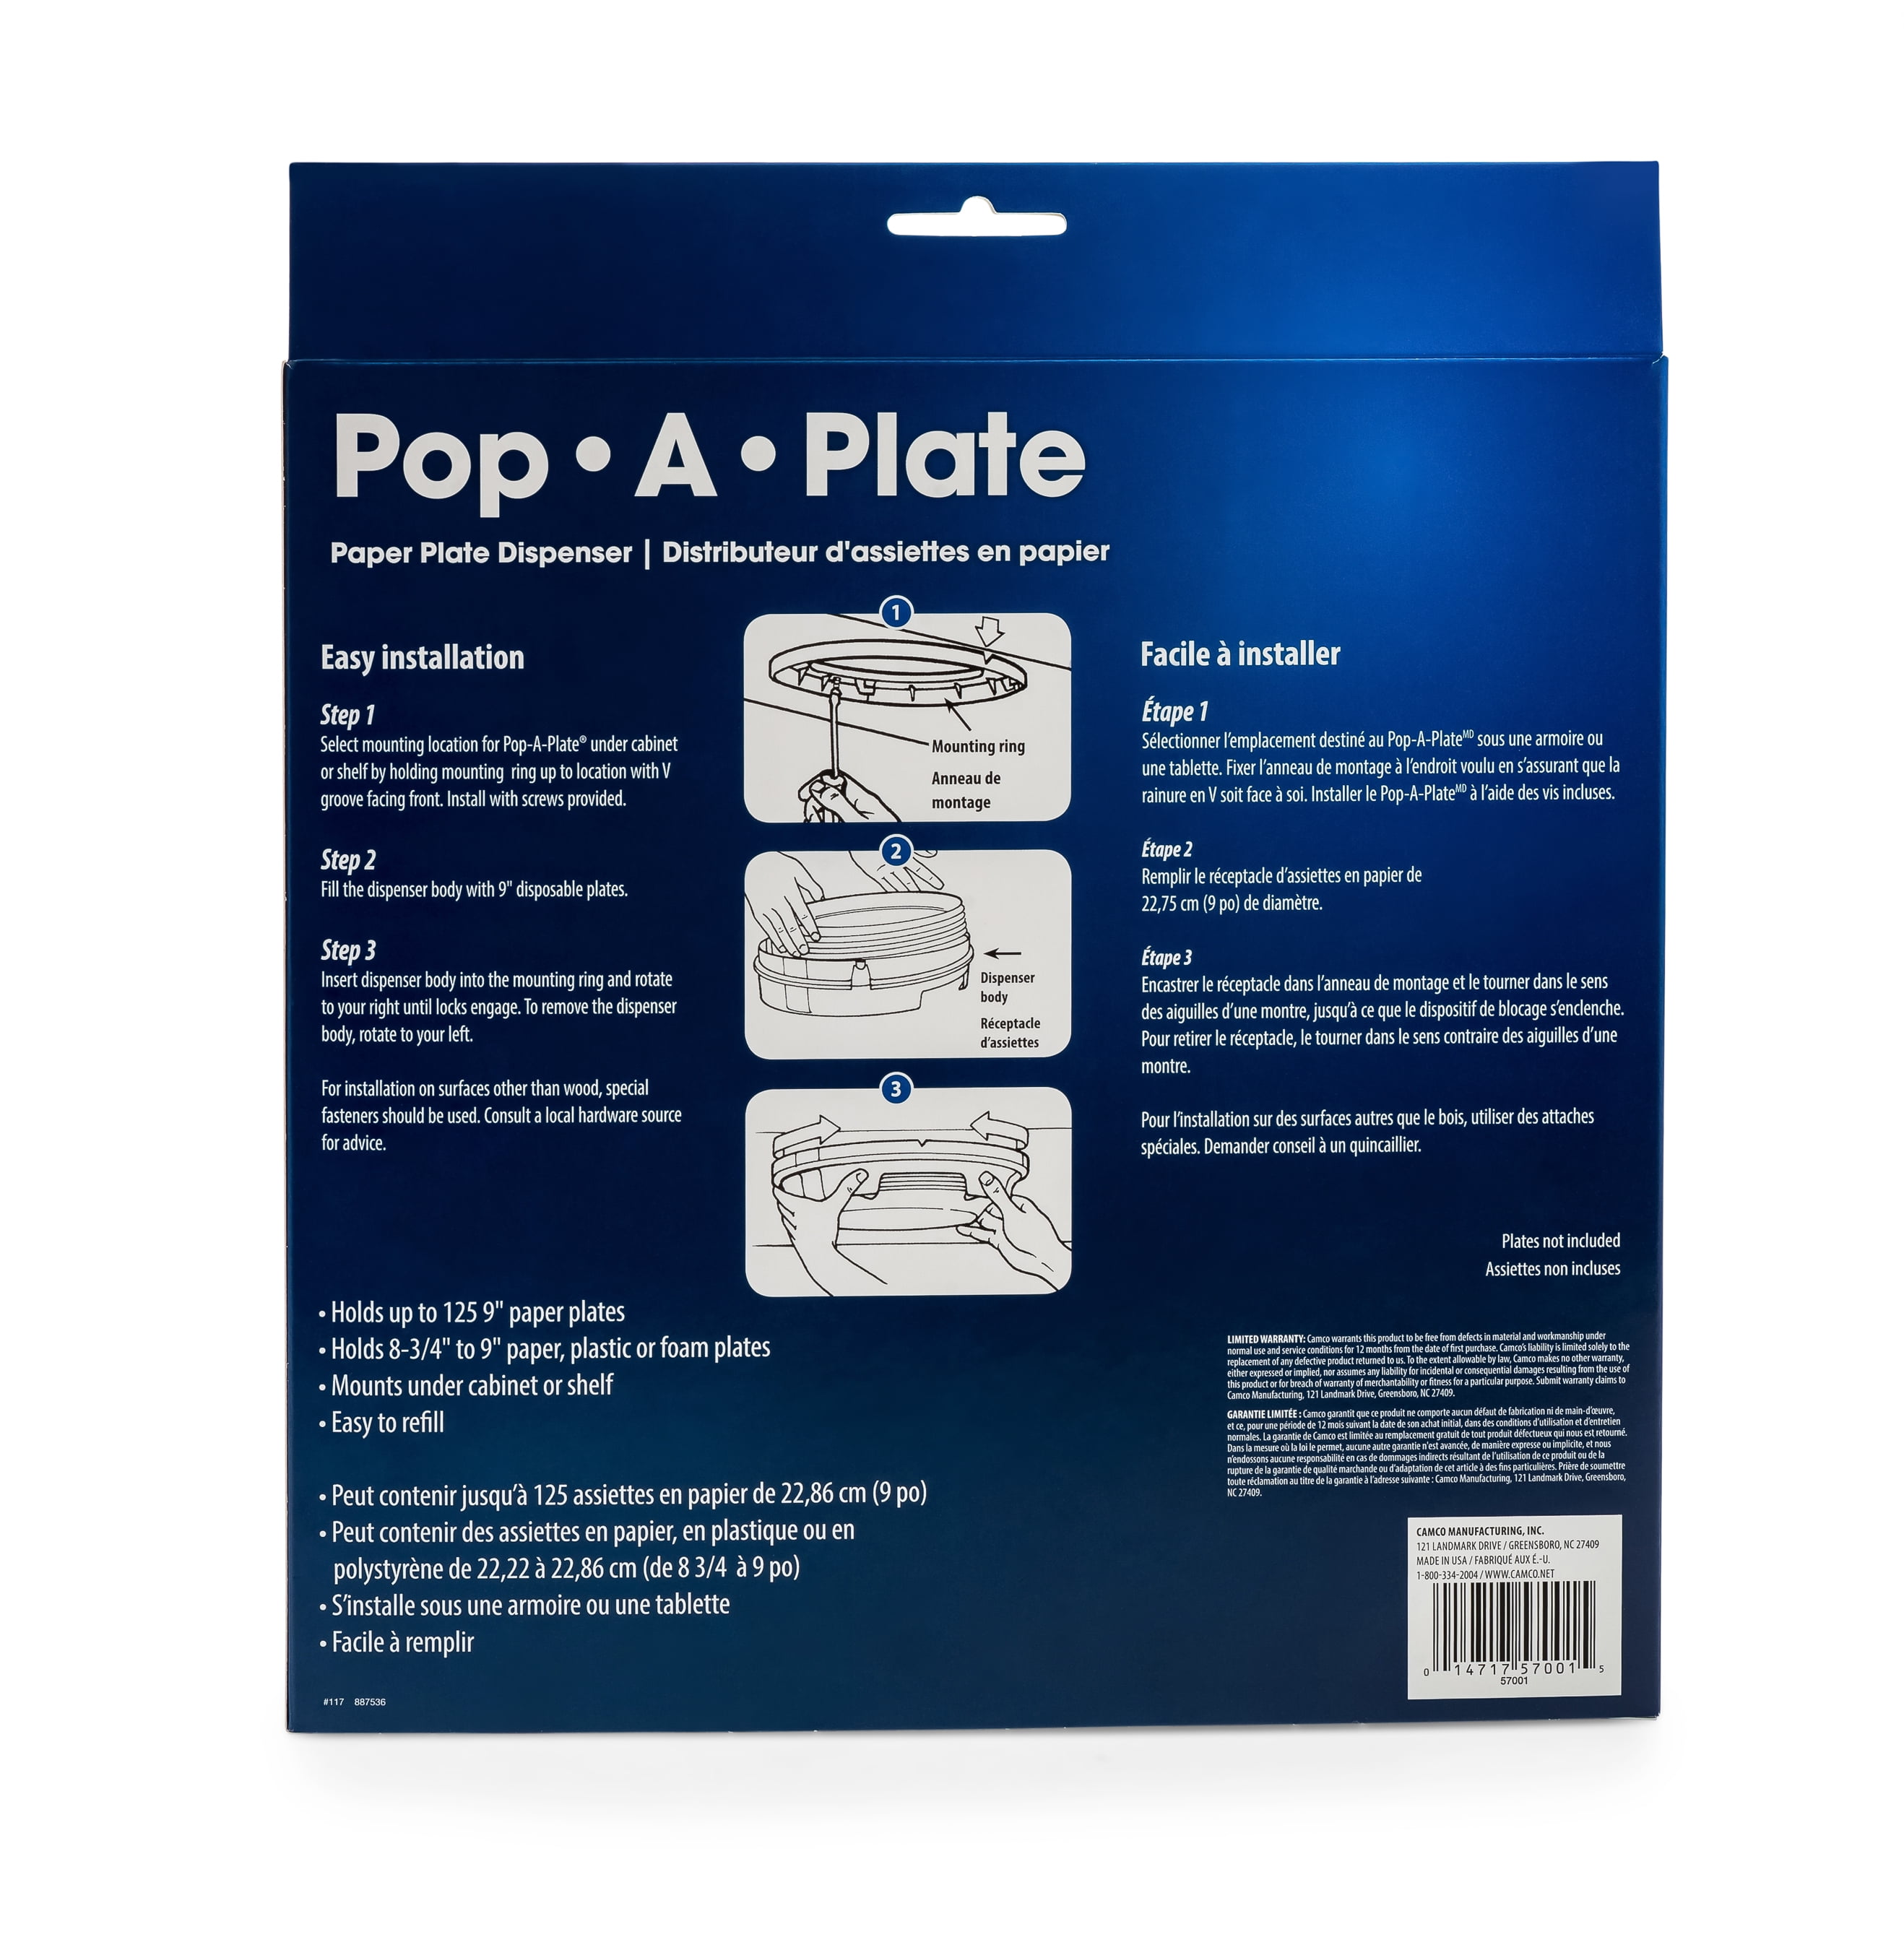 Camco Pop-A-Plate Paper/Plastic Plate Dispener Holds 125, 9 Plates, Mounts  to Walls and Cabinets, Easily Organize and Conserve Space in Your Kitchen